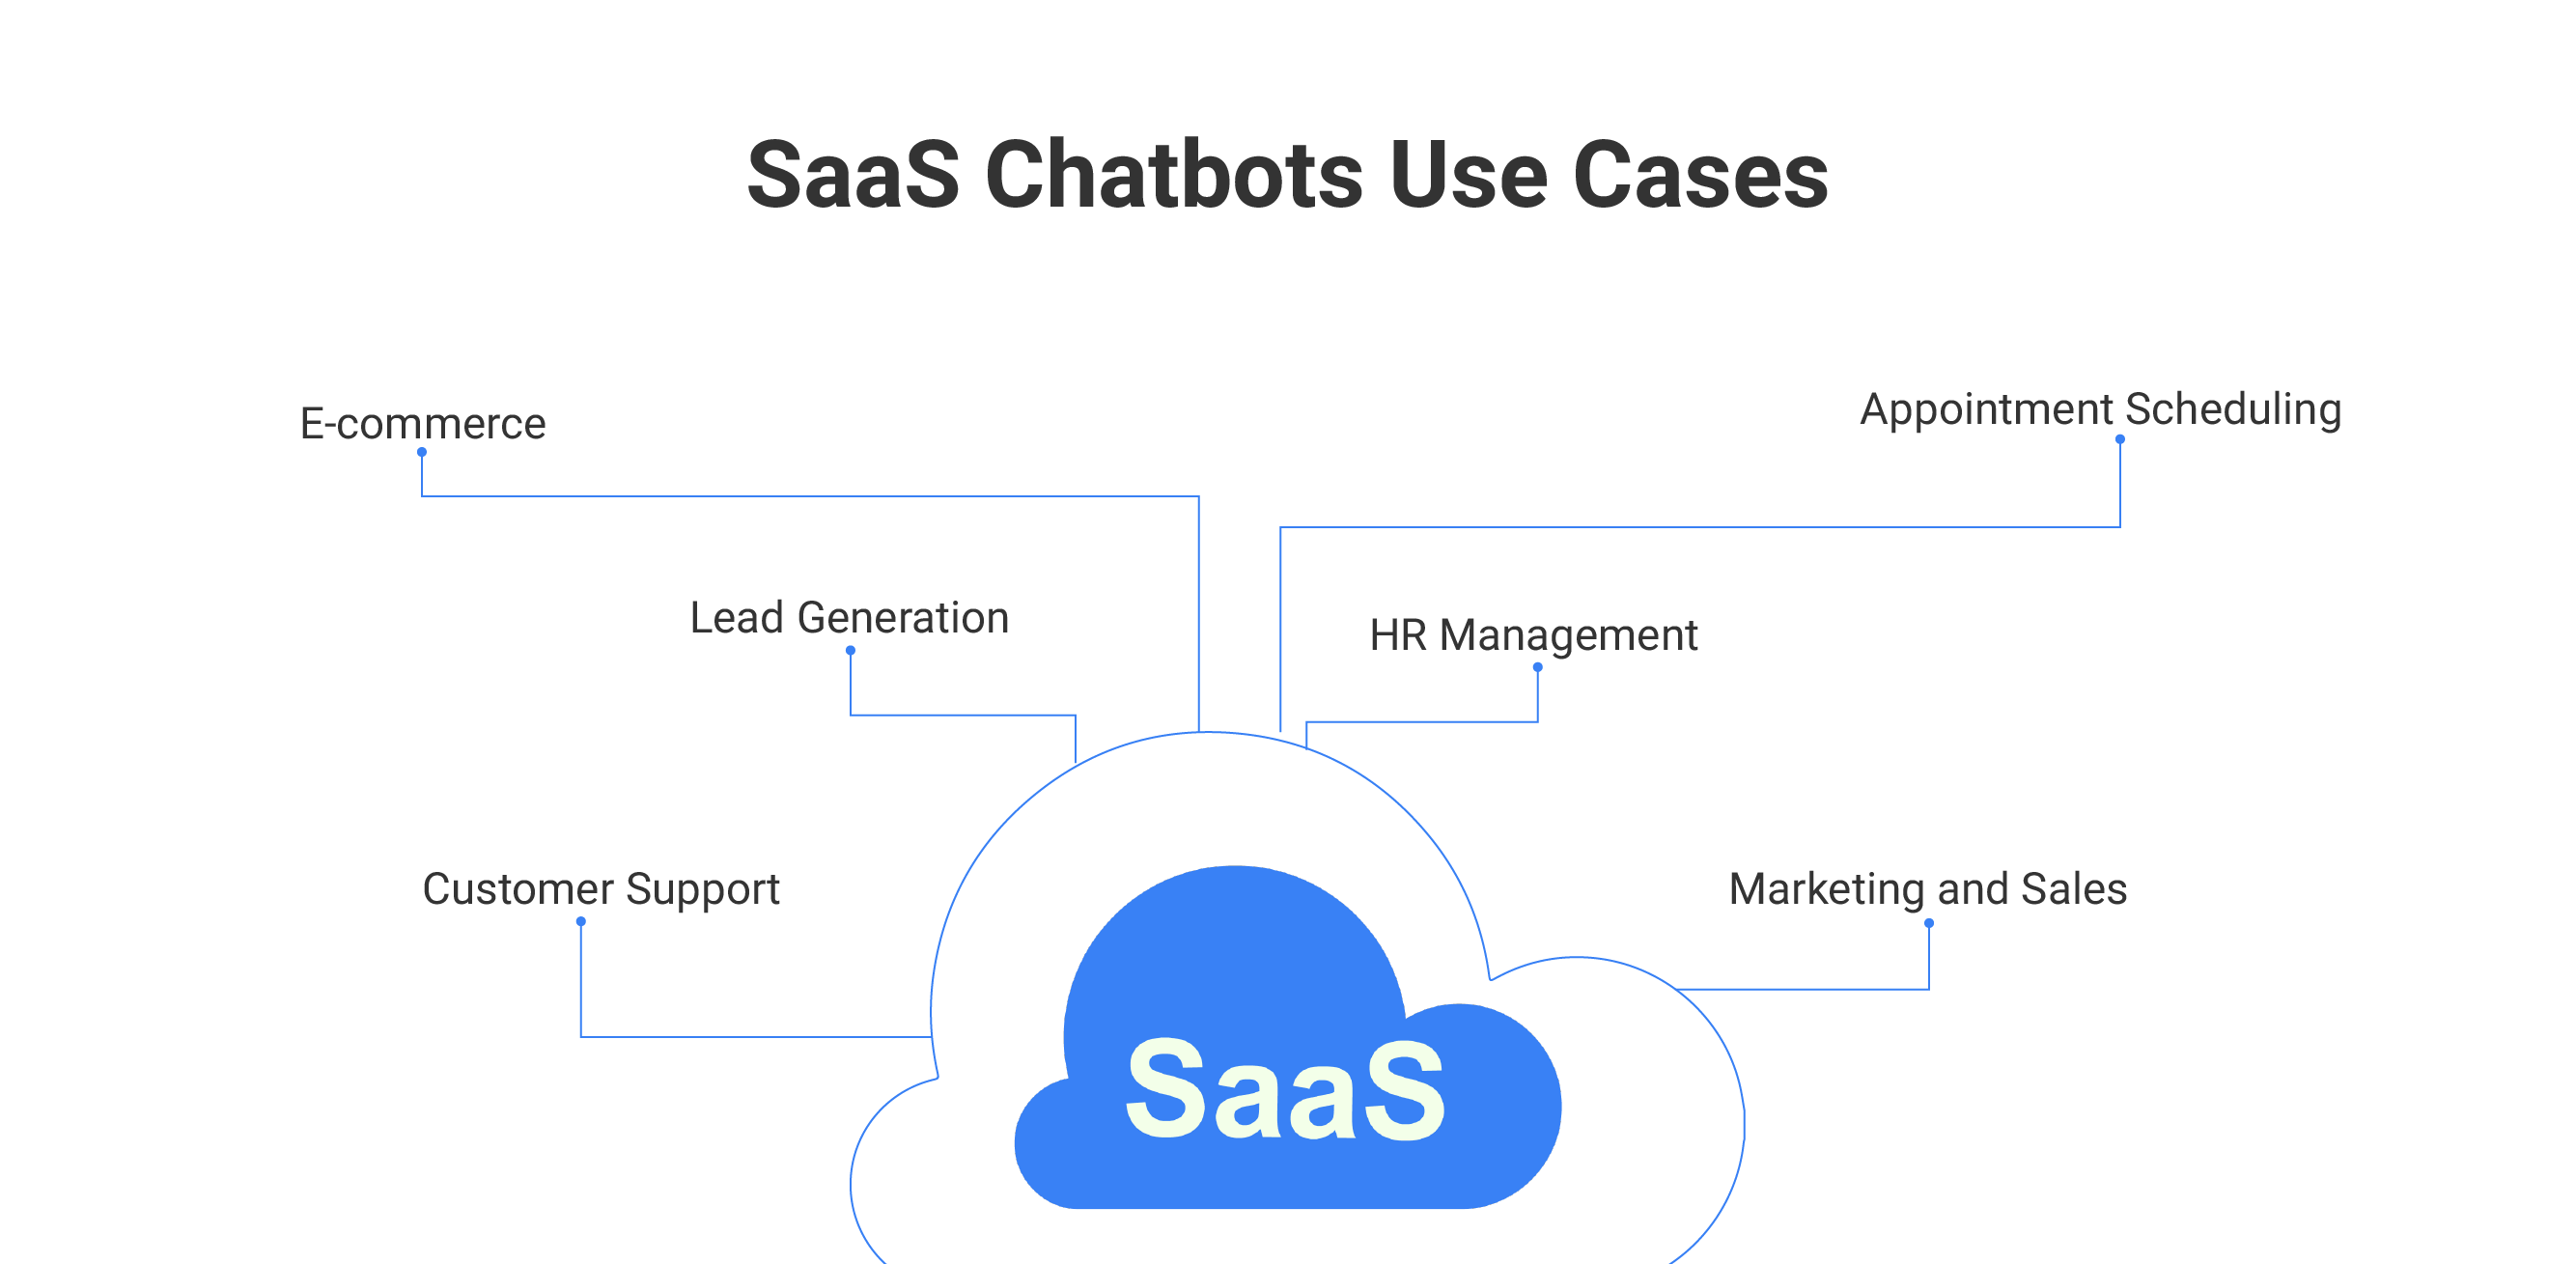 SaaS Chatbots Use Cases